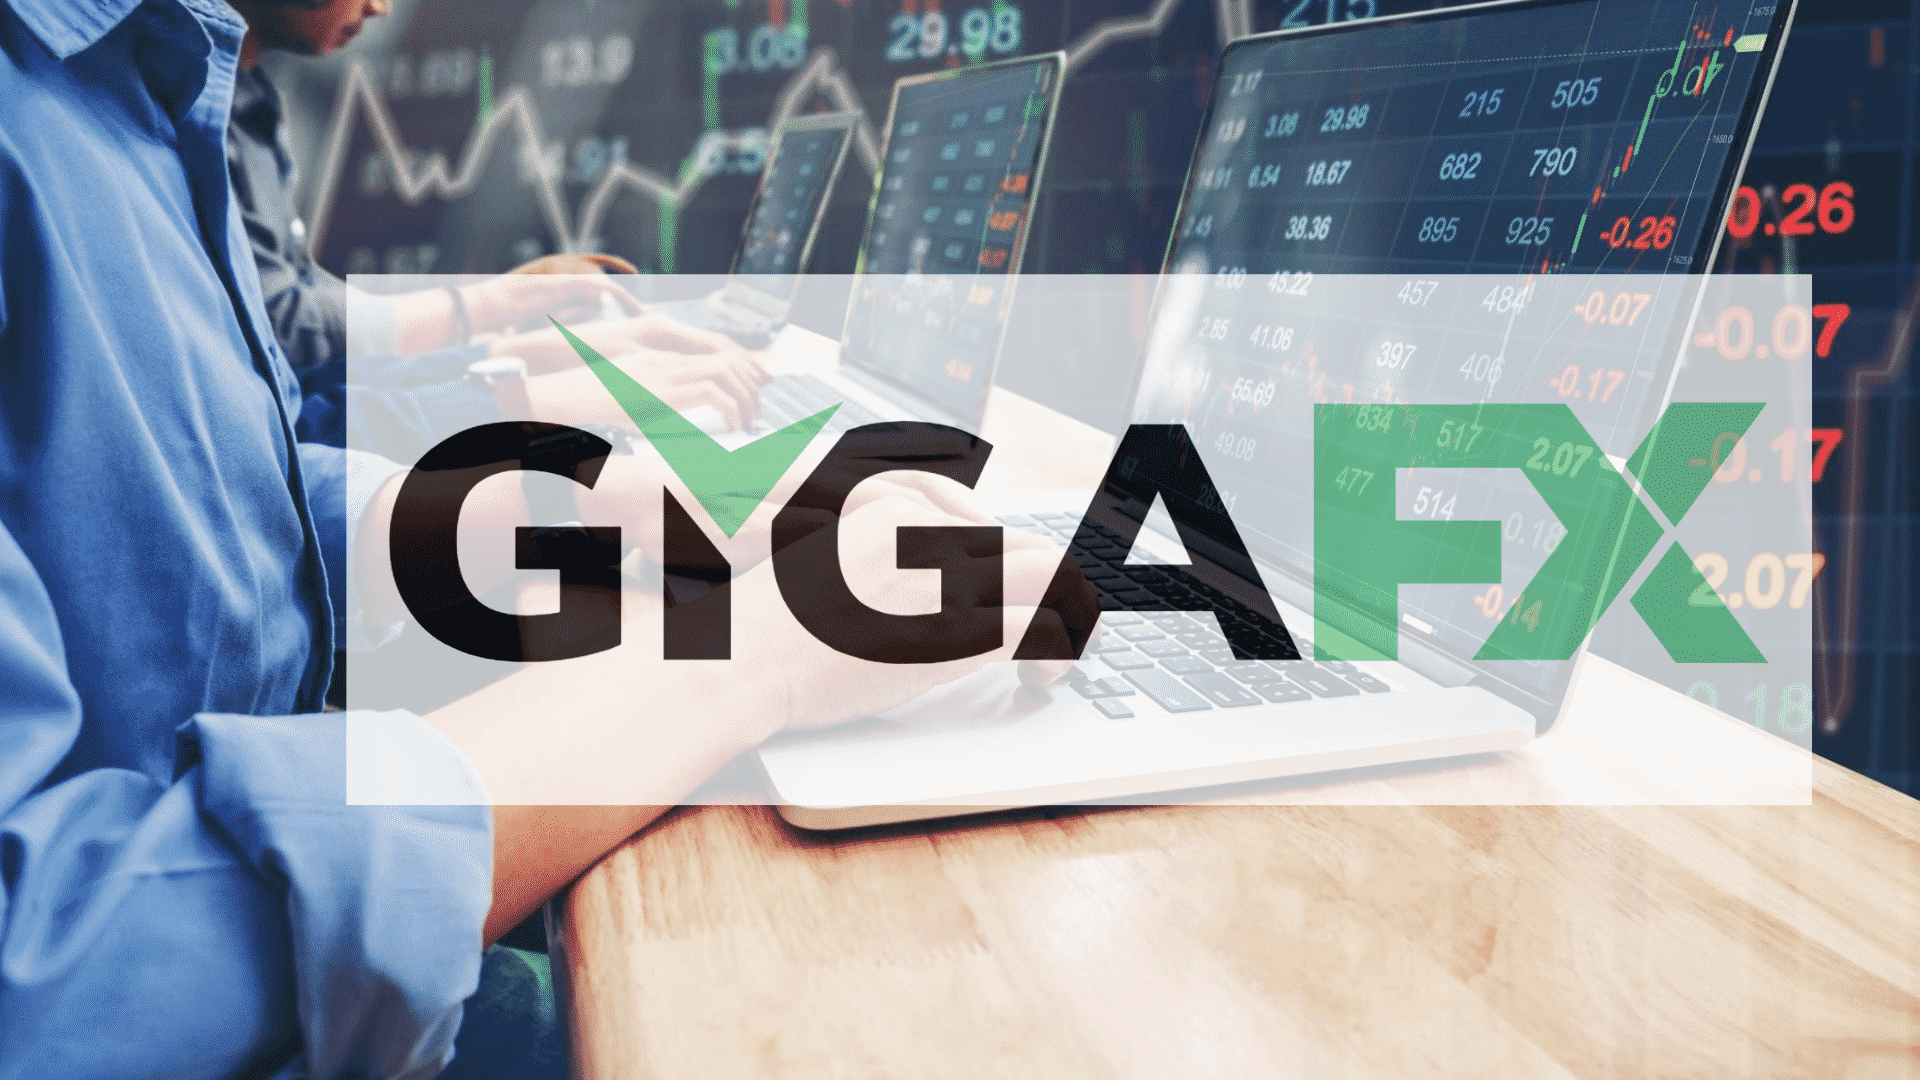 GigaFX Now Allows You to Have Custom-made Trading Accounts